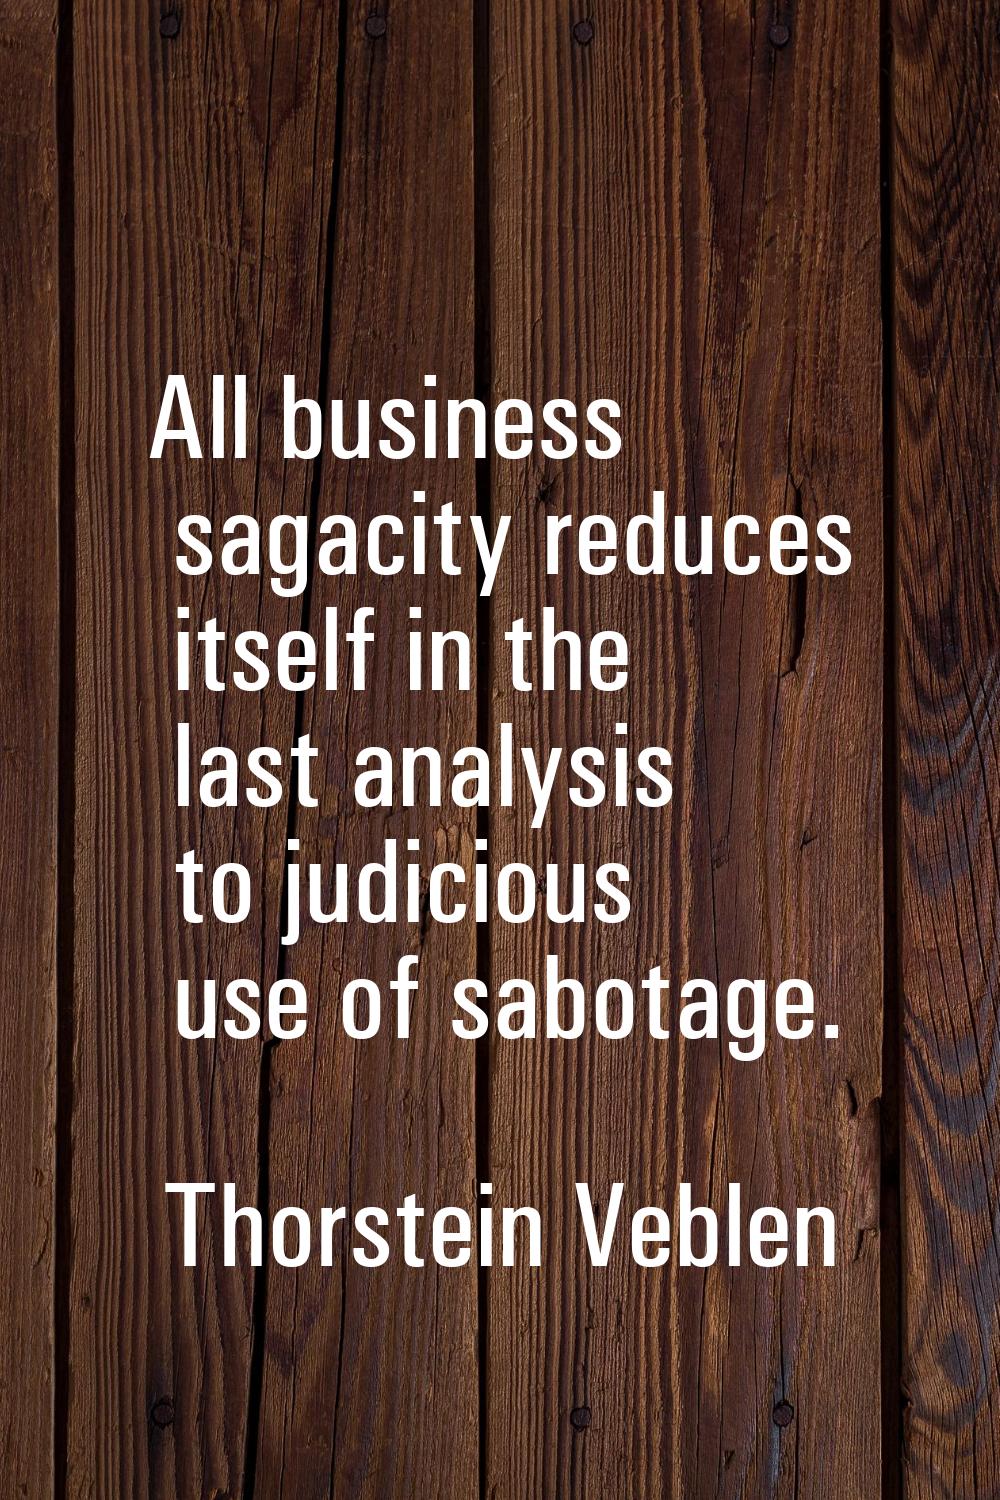 All business sagacity reduces itself in the last analysis to judicious use of sabotage.